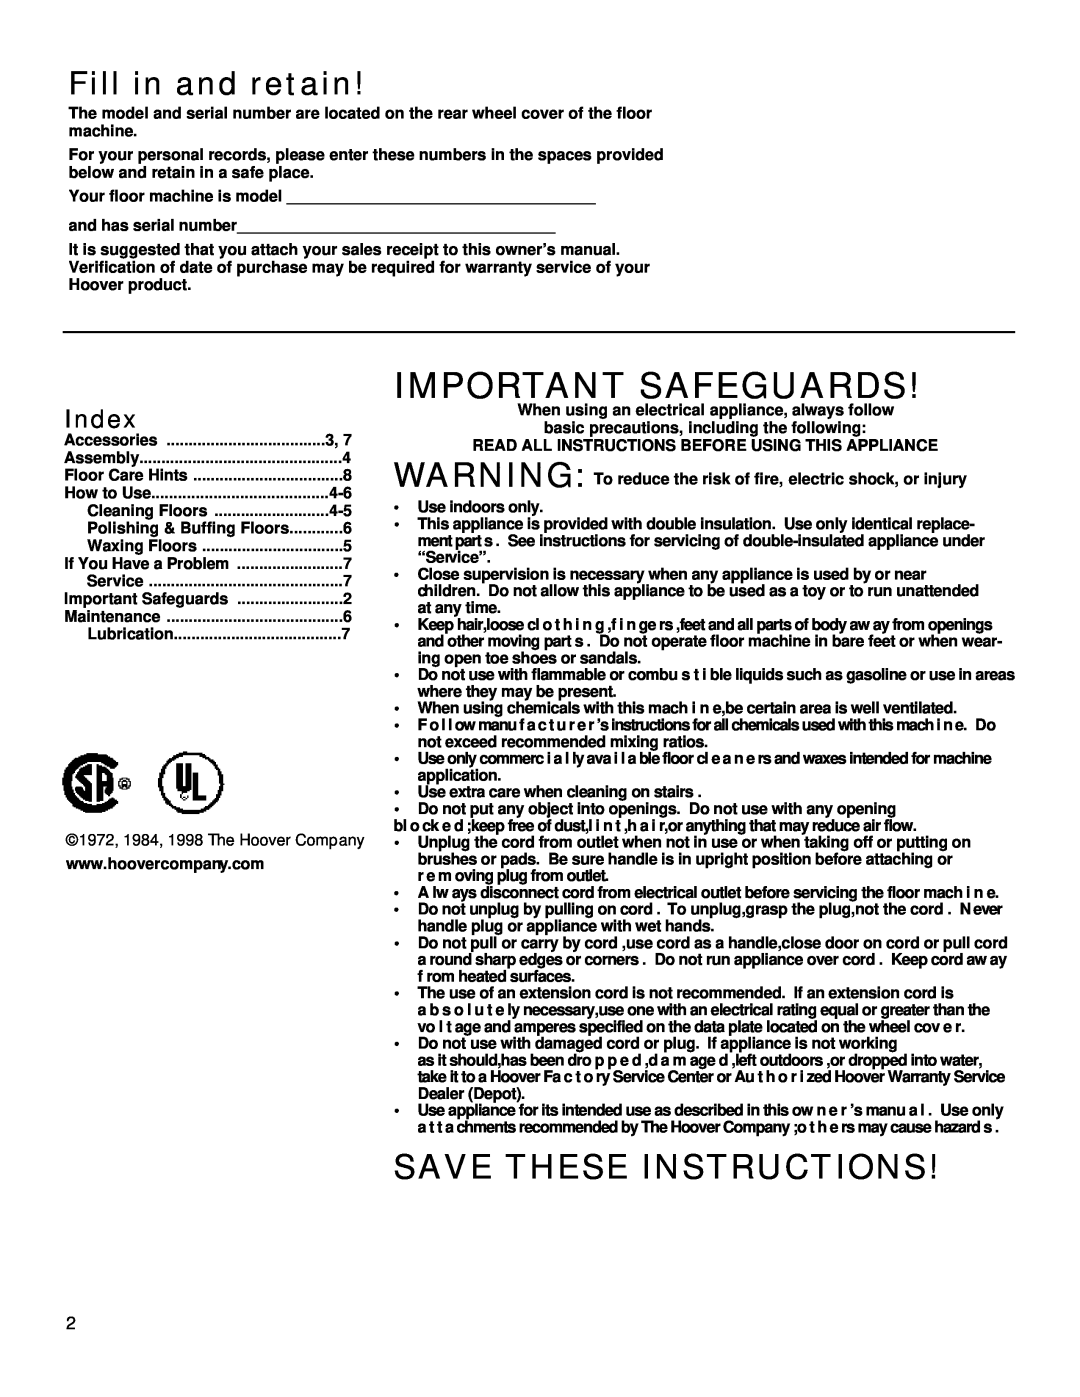 Hoover Hard Floor Machine owner manual Fill in and retain, Index, Important Safeguards, Save These Instructions 